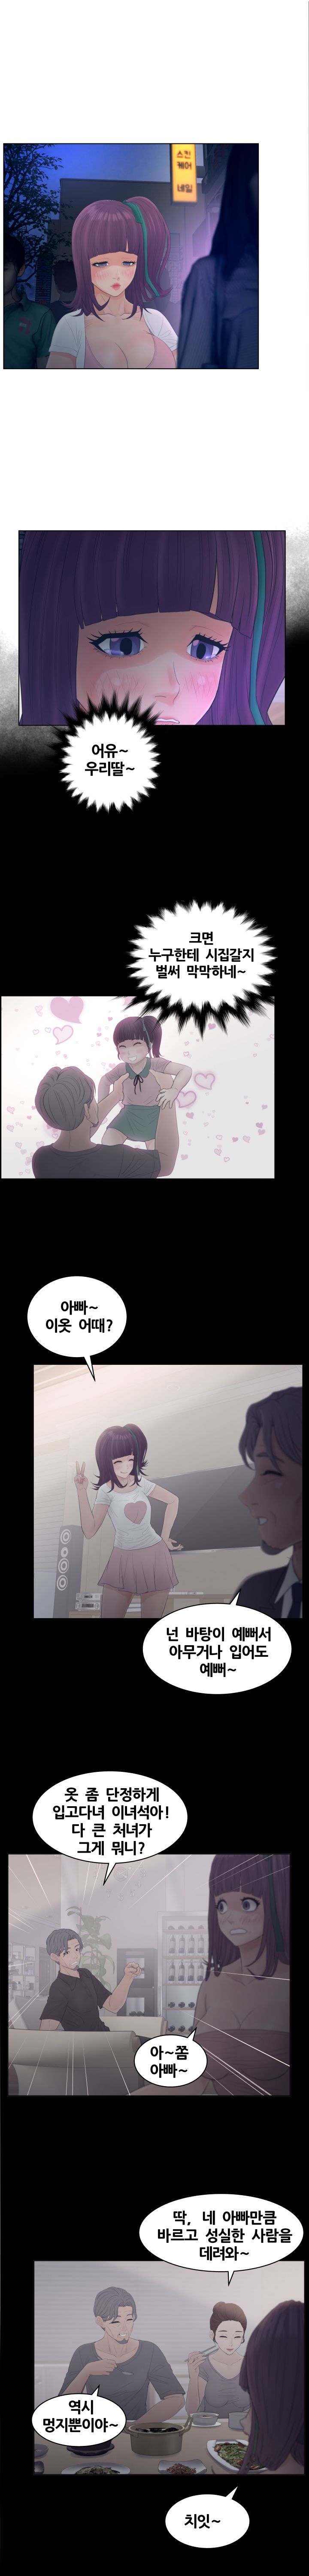 Share Girls Raw - Chapter 18 Page 3